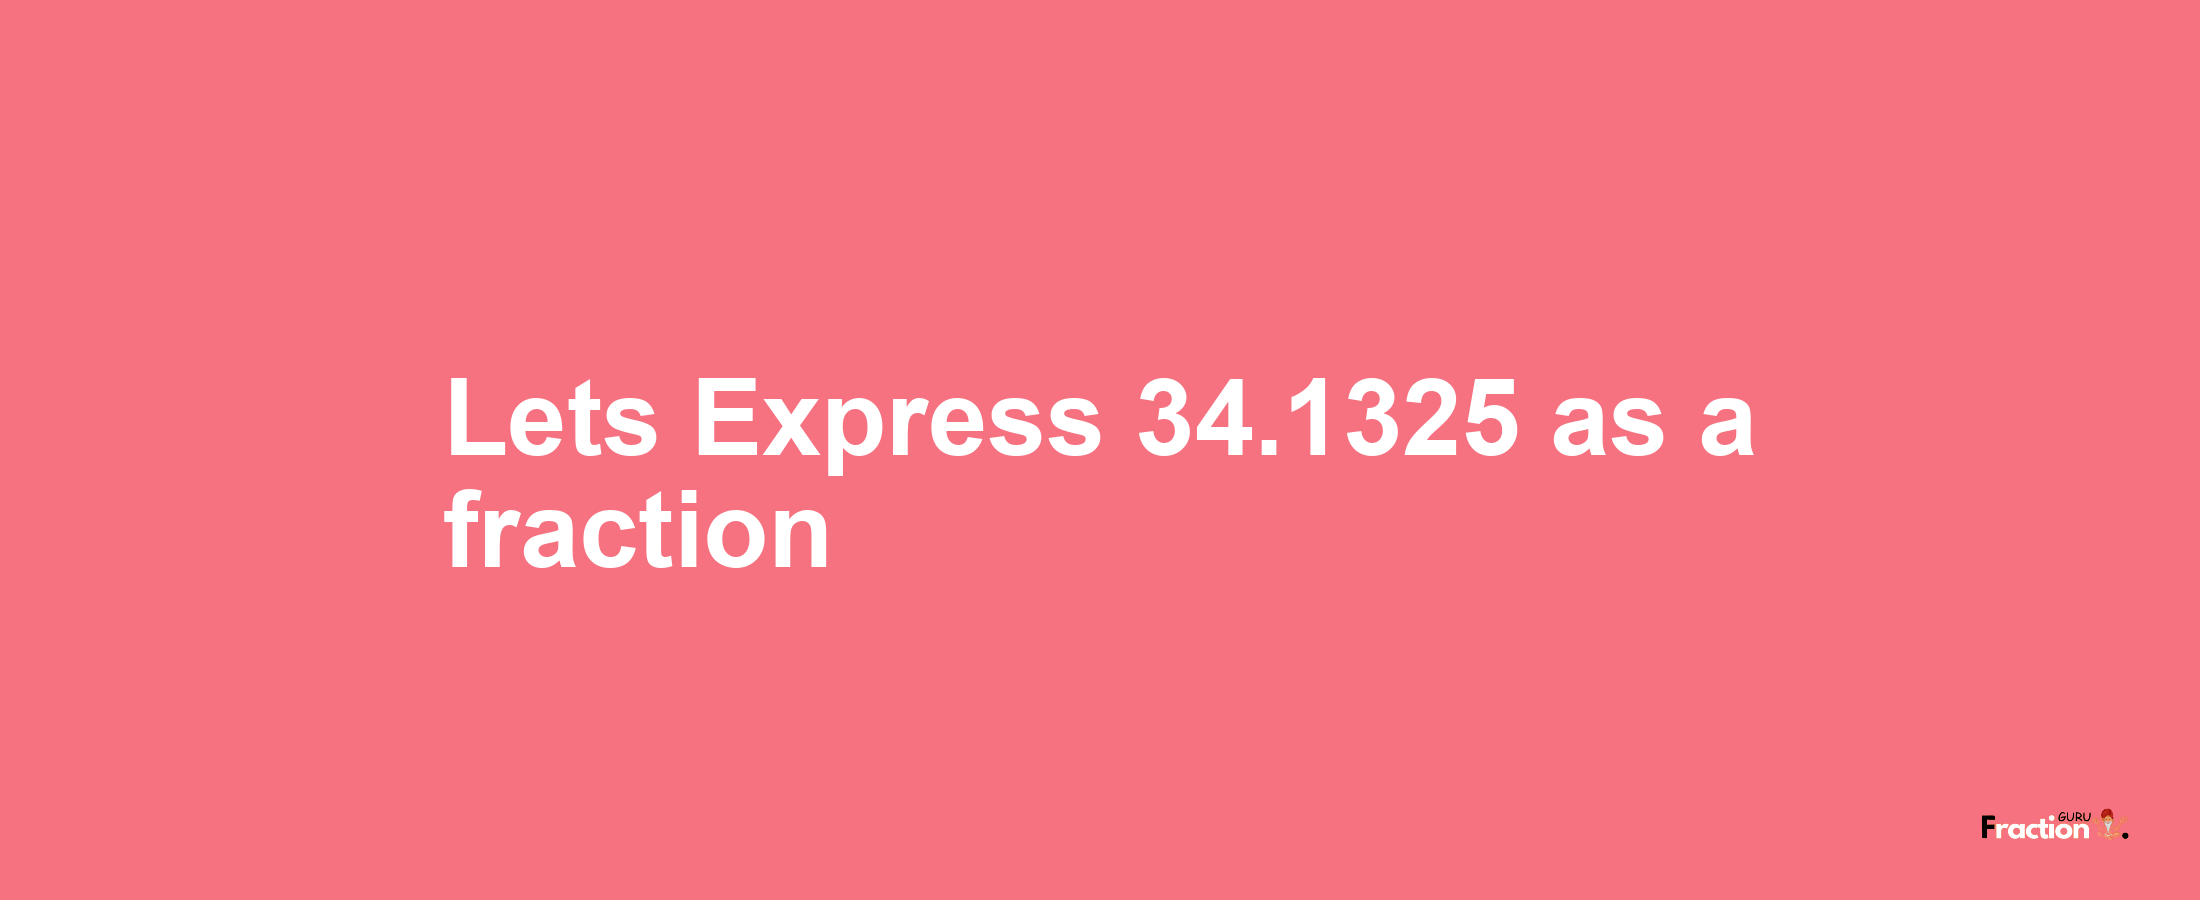 Lets Express 34.1325 as afraction